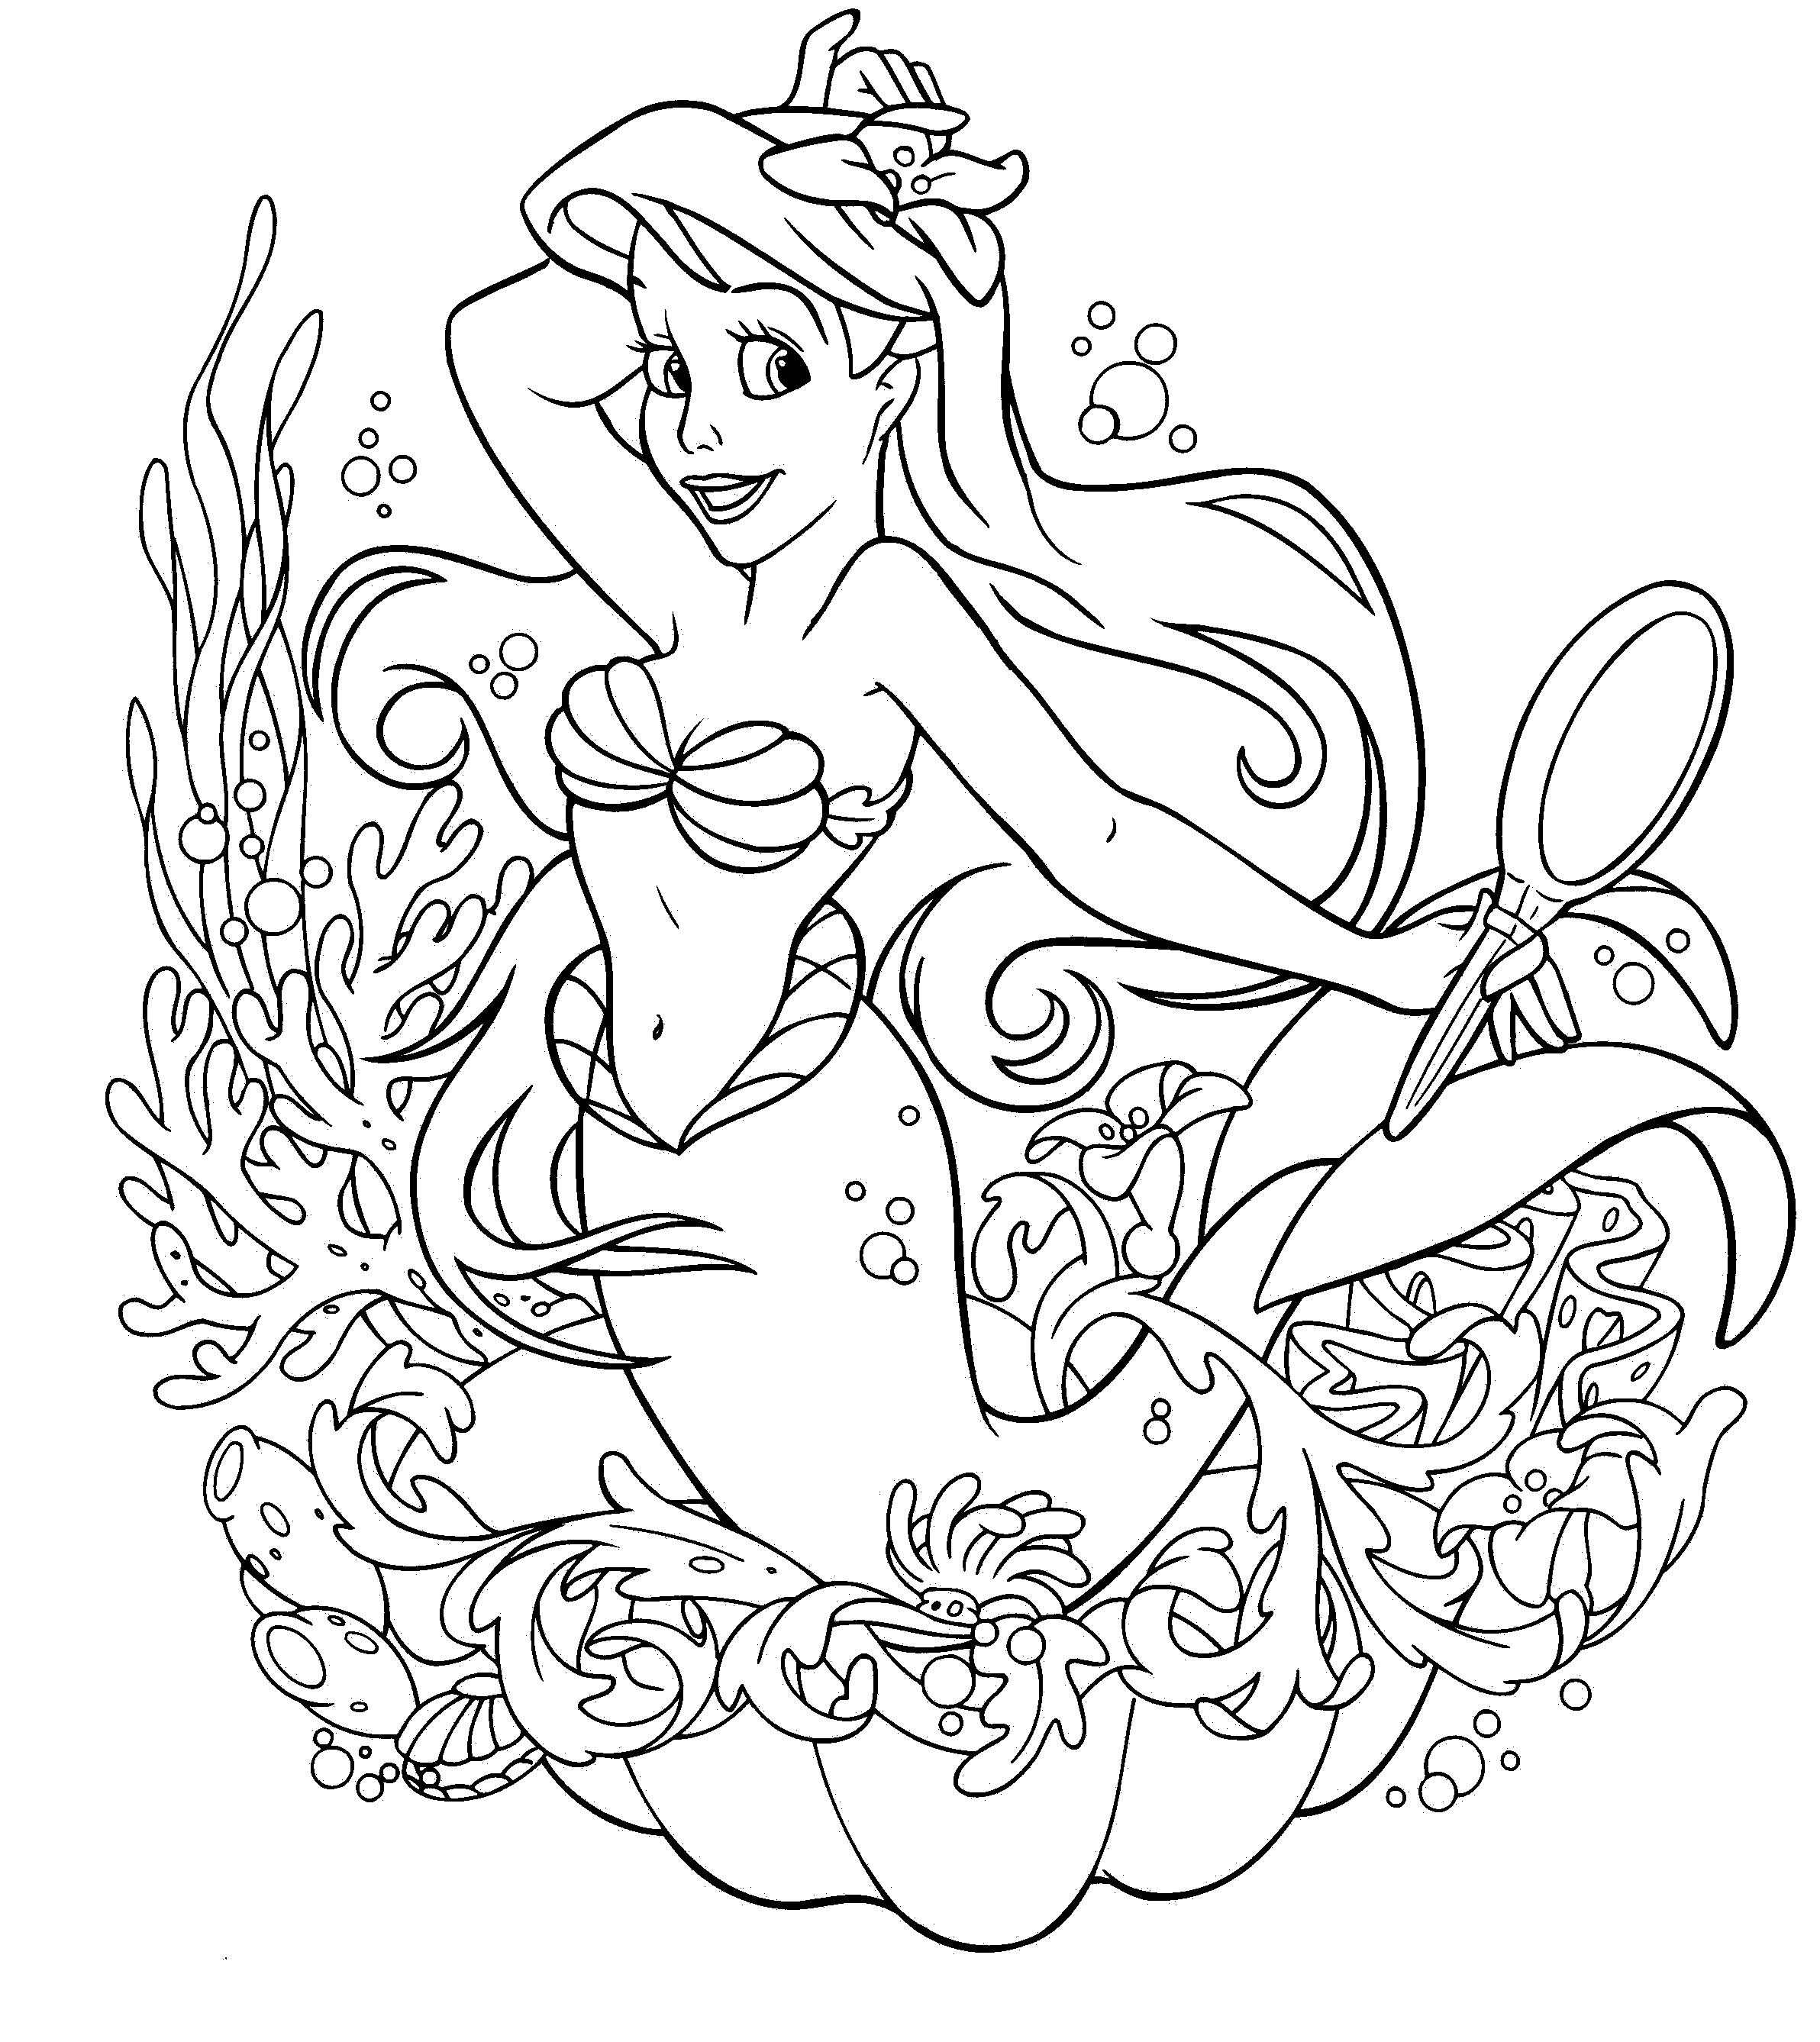 Coloring Sheets For Girls Printable Chistmas
 Coloring Pages for Girls Z31 Coloring Page